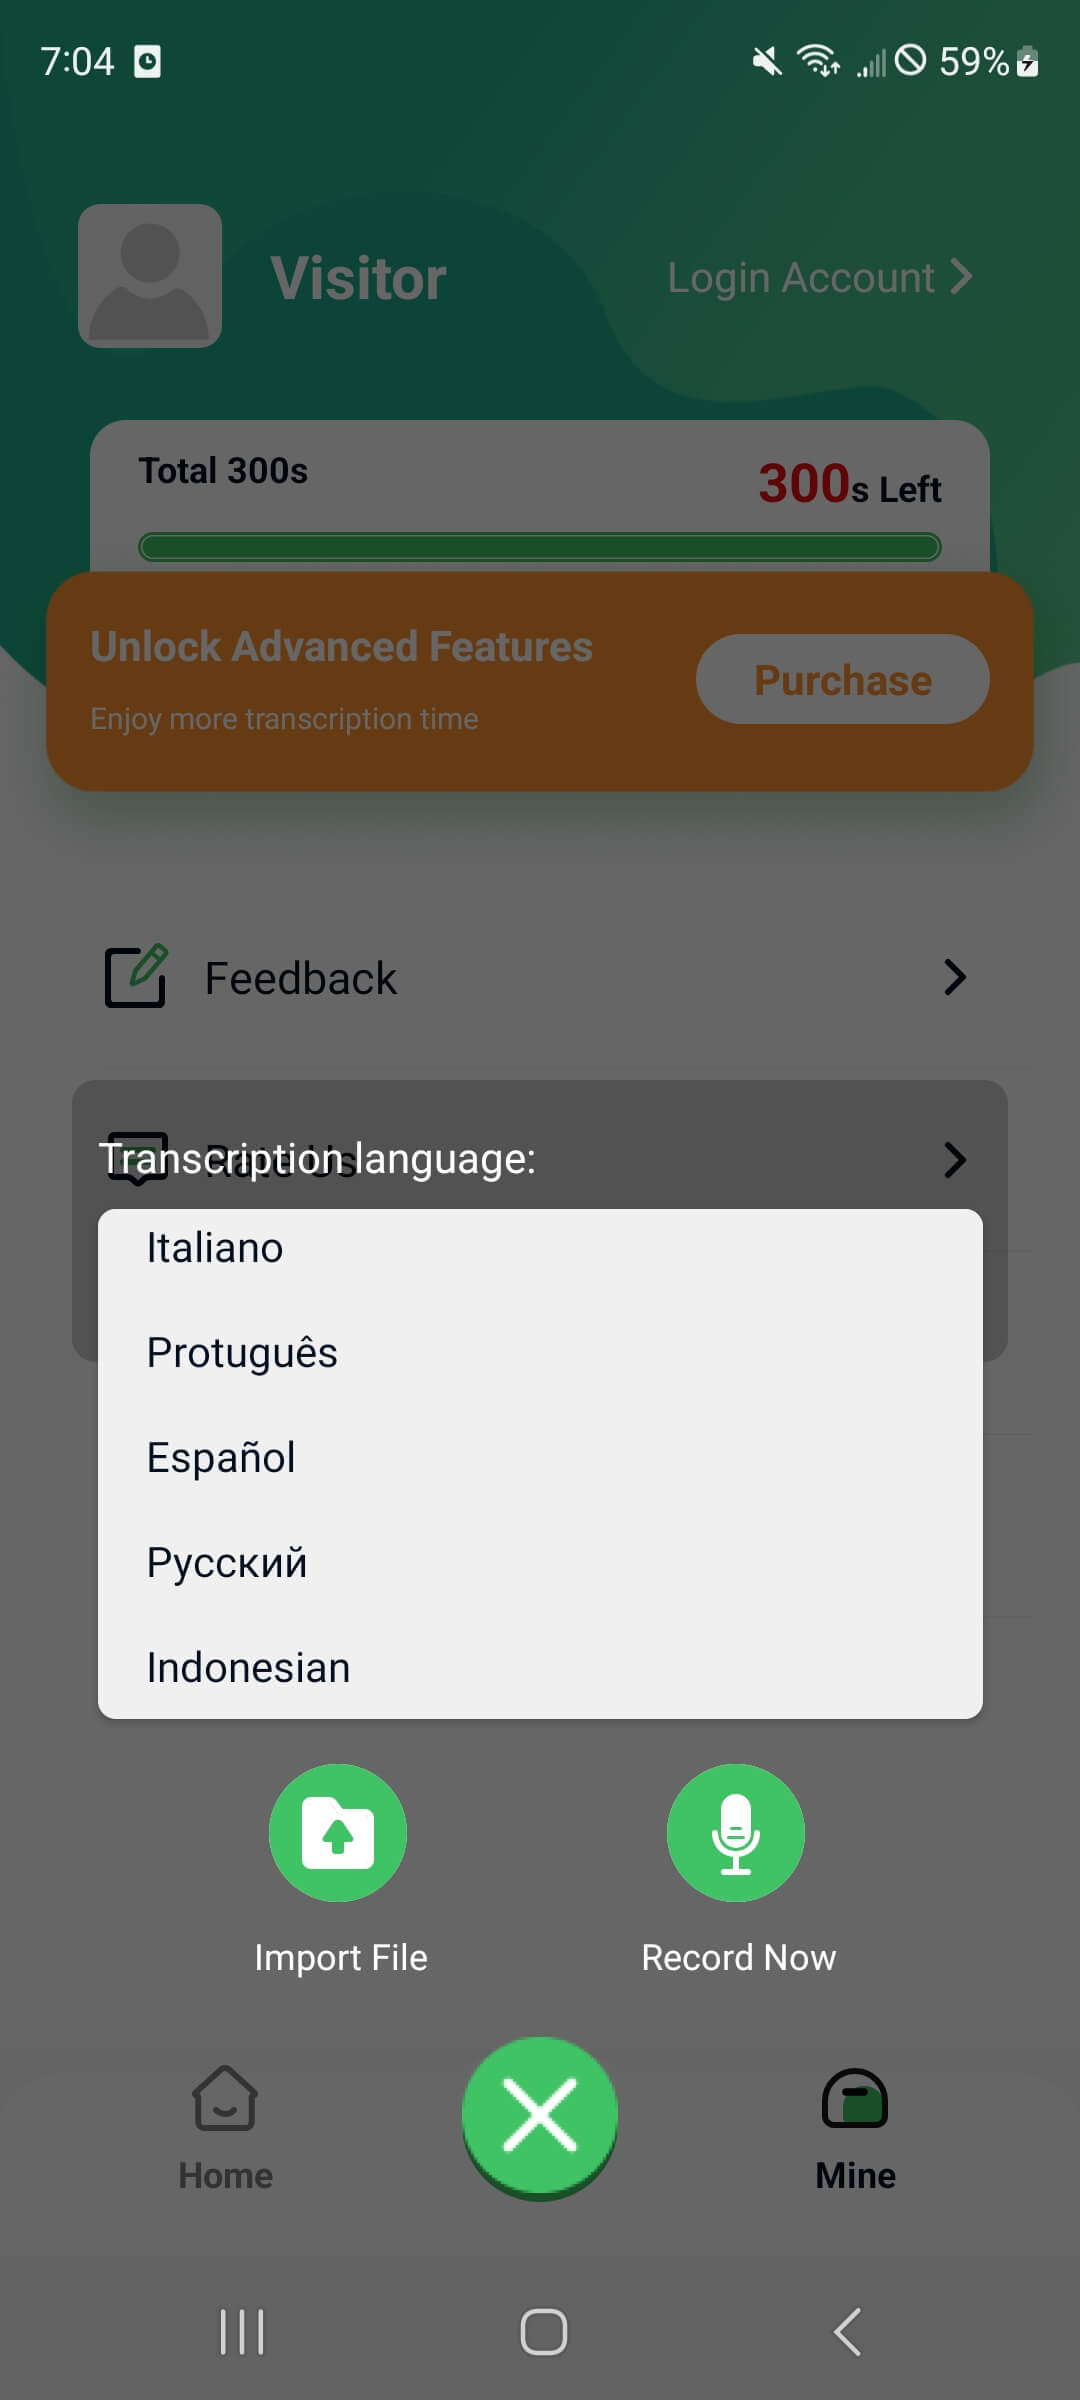 select the language to transcribe